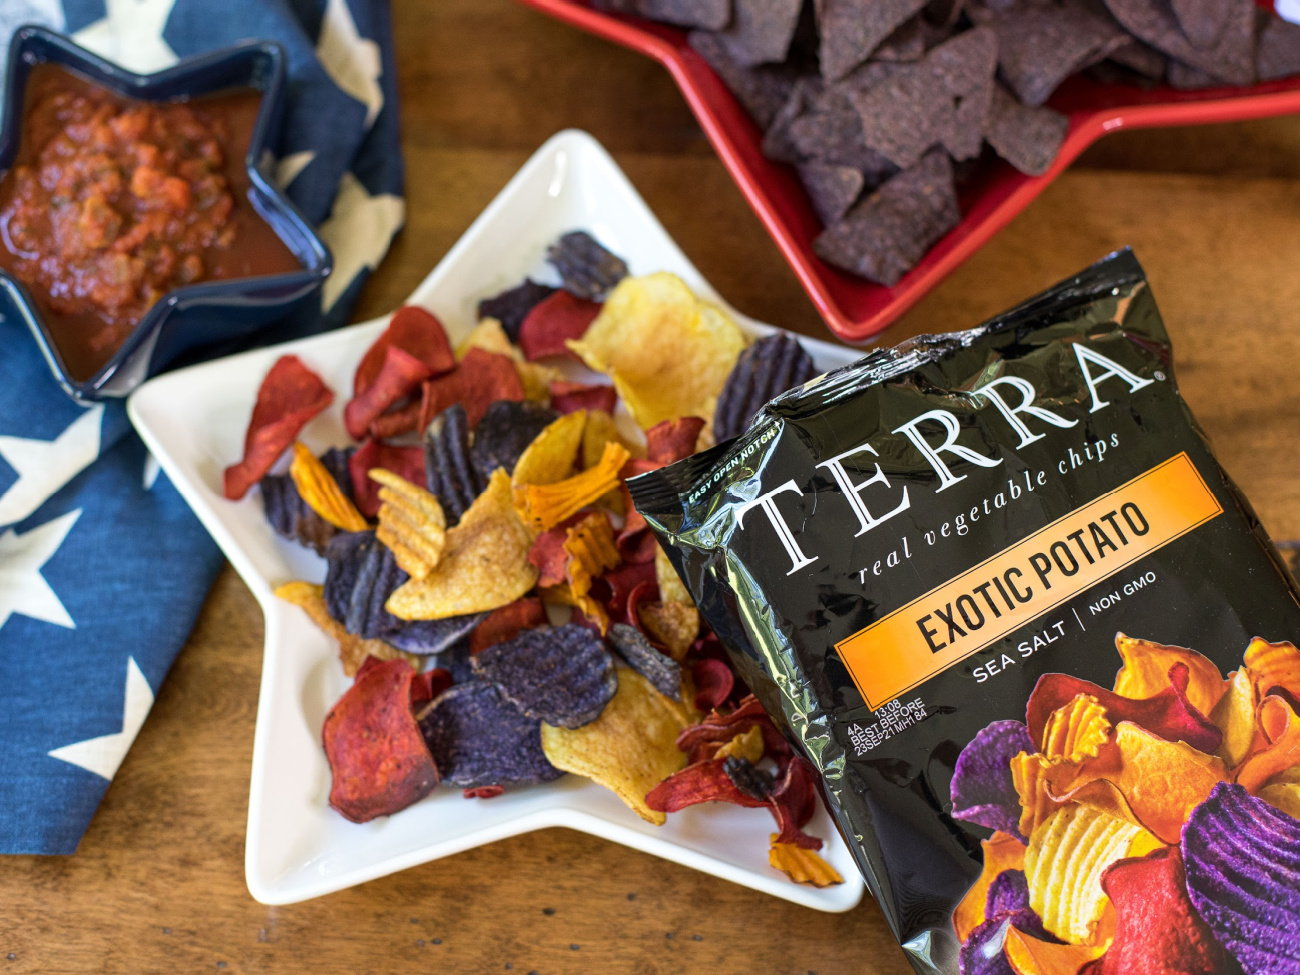 Terra Chips Are The Ultimate Snack For Your 4th of July Festivities – Save NOW At Publix